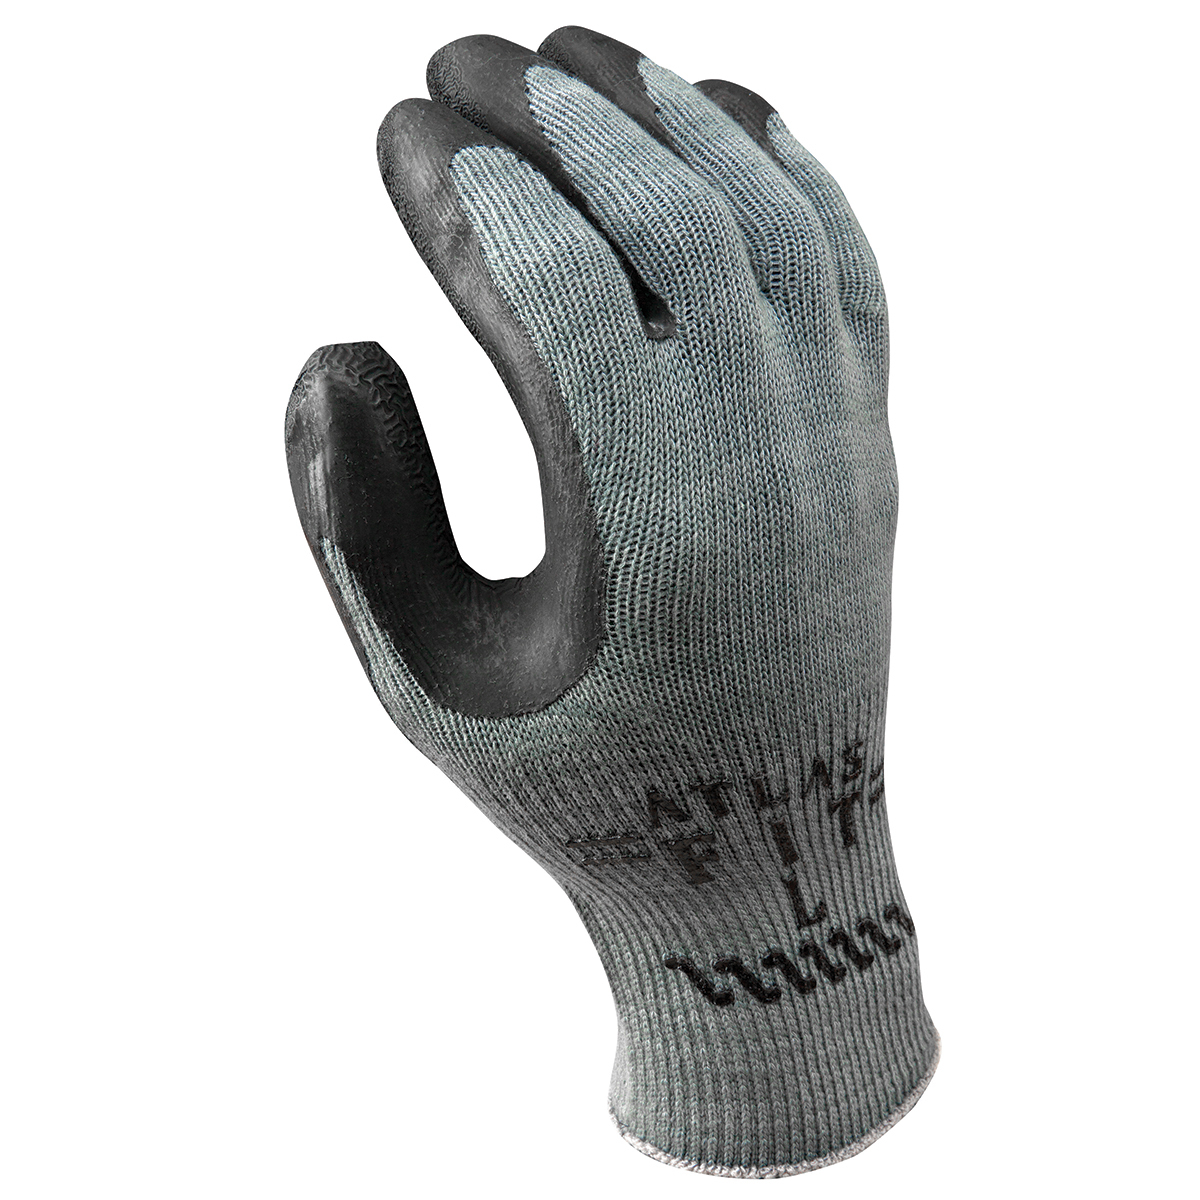 SHOWA® Size 10 ATLAS® 10 Gauge Natural Rubber Palm Coated Work Gloves With Cotton And Polyester Liner And Knit Wrist